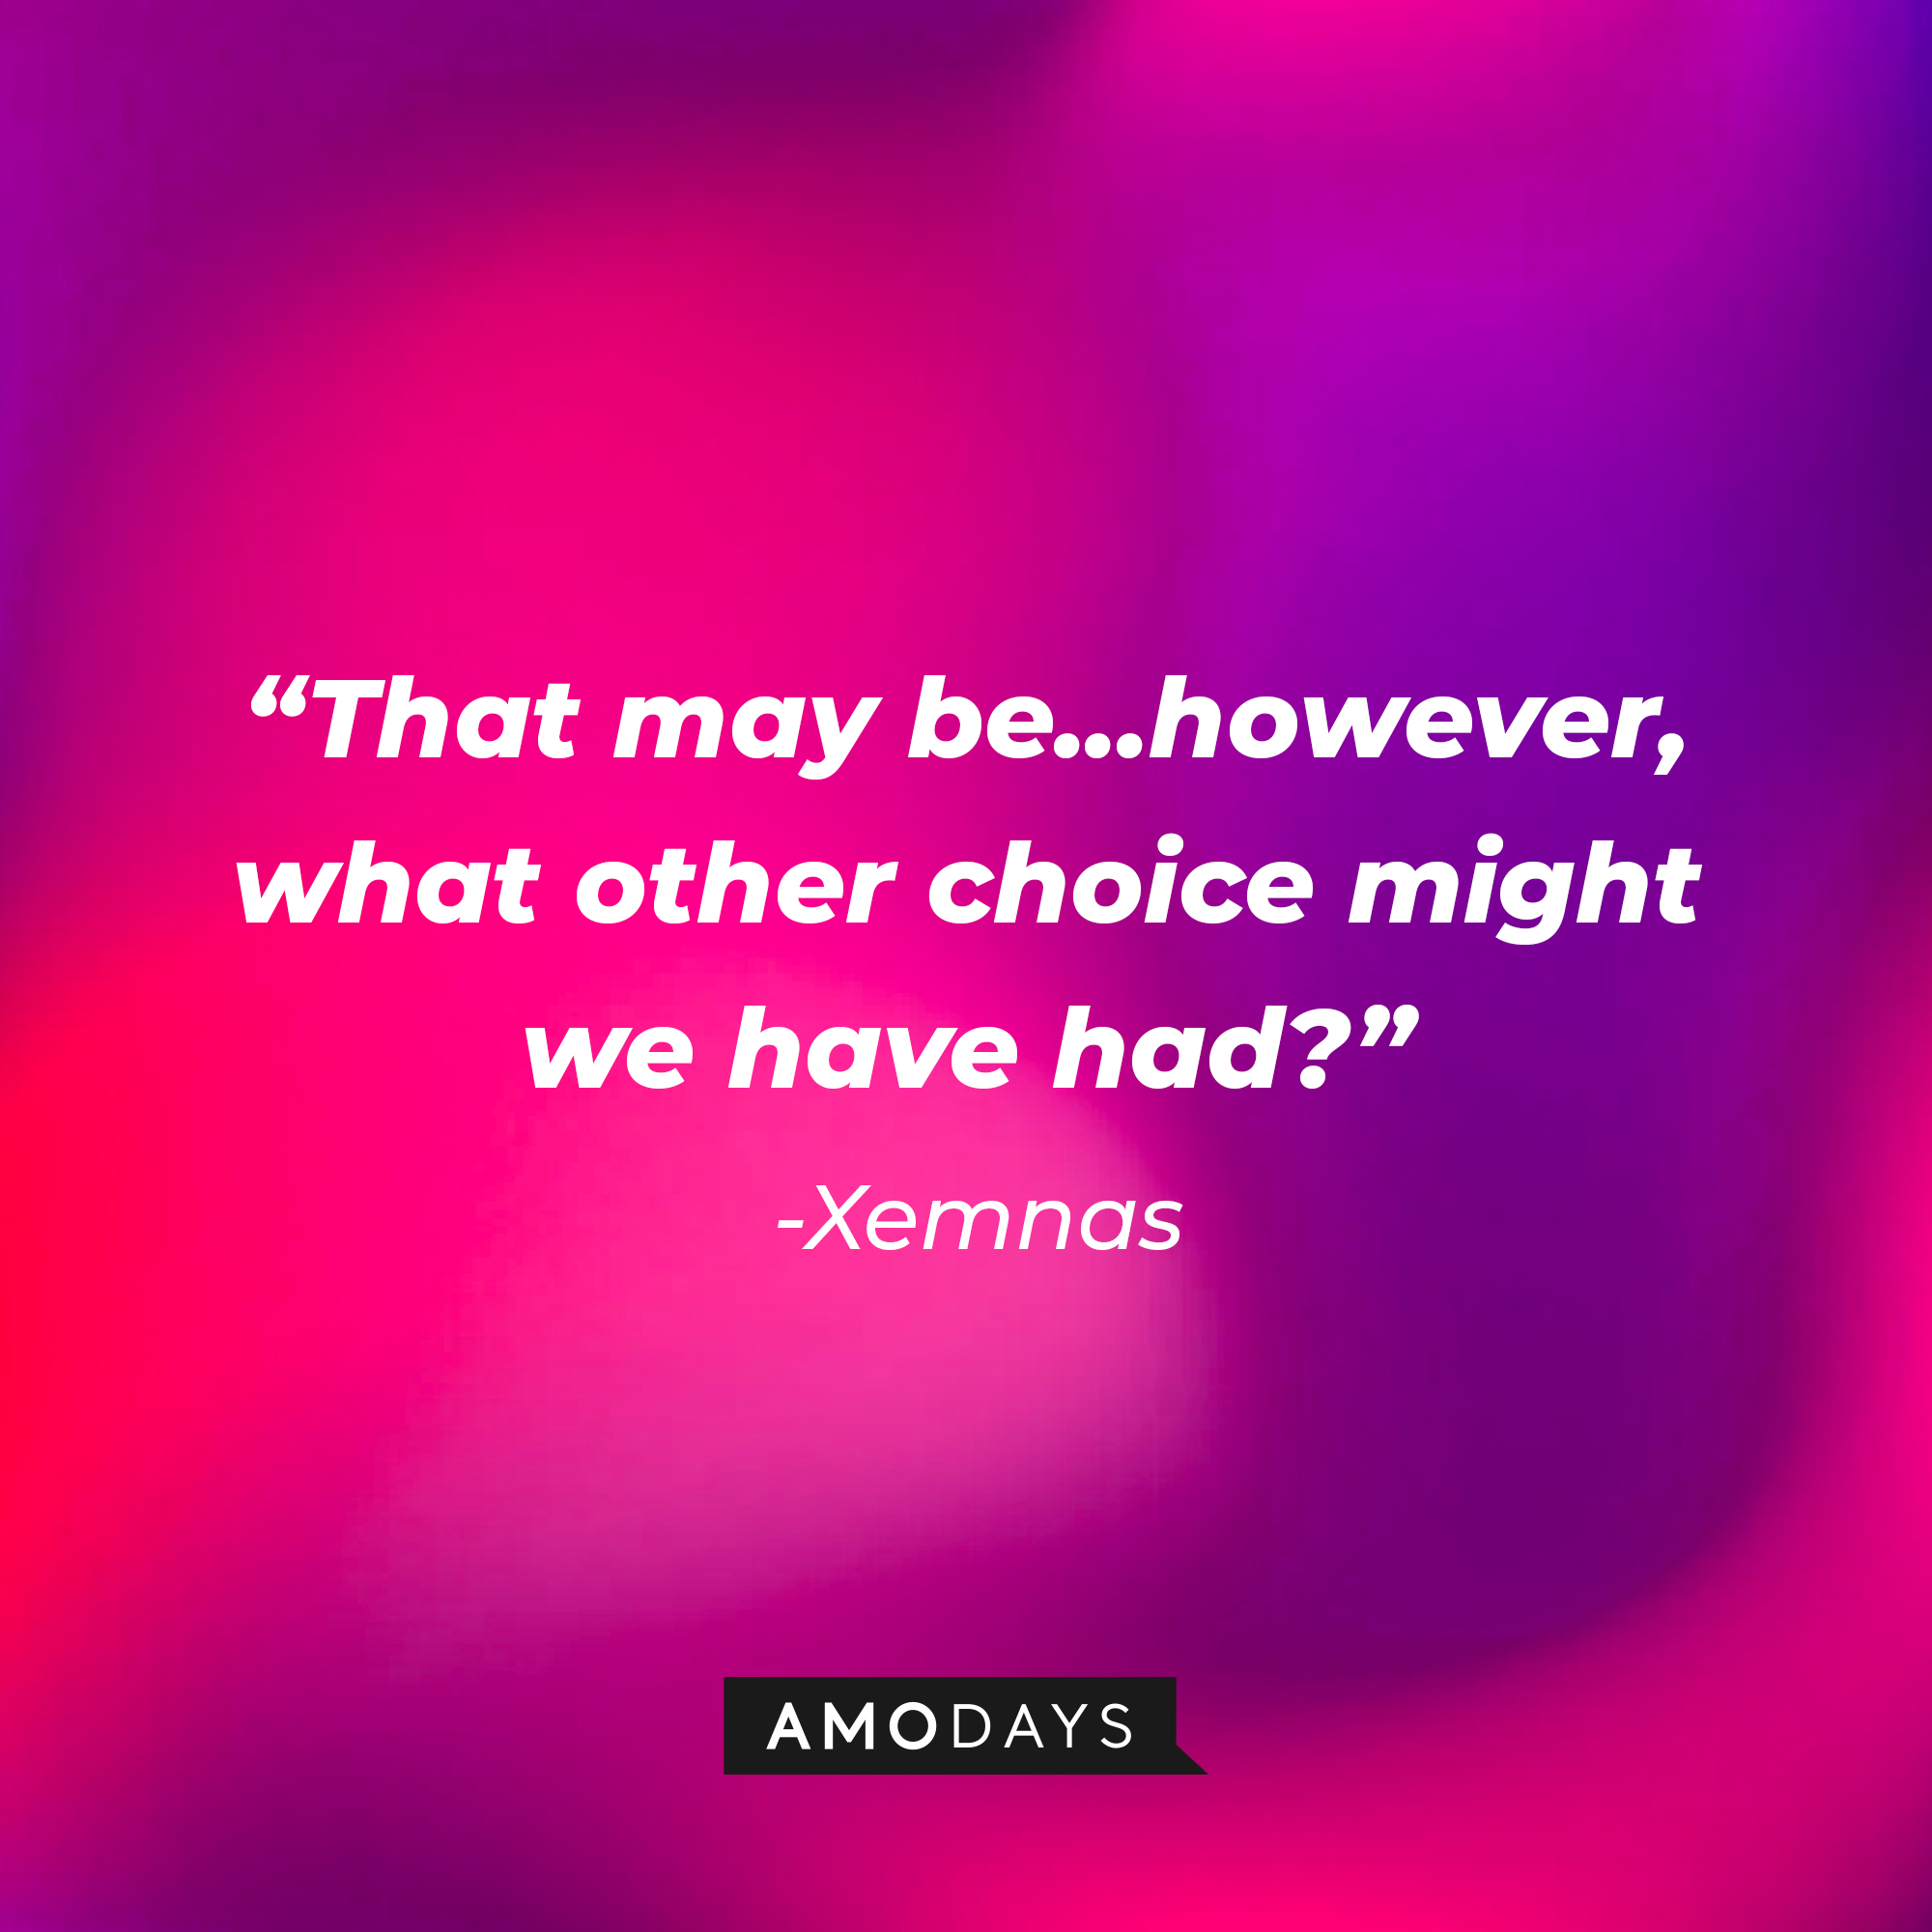 Xenmas’ quote: “That may be...however, what other choice might we have had?” | Source: AmoDays